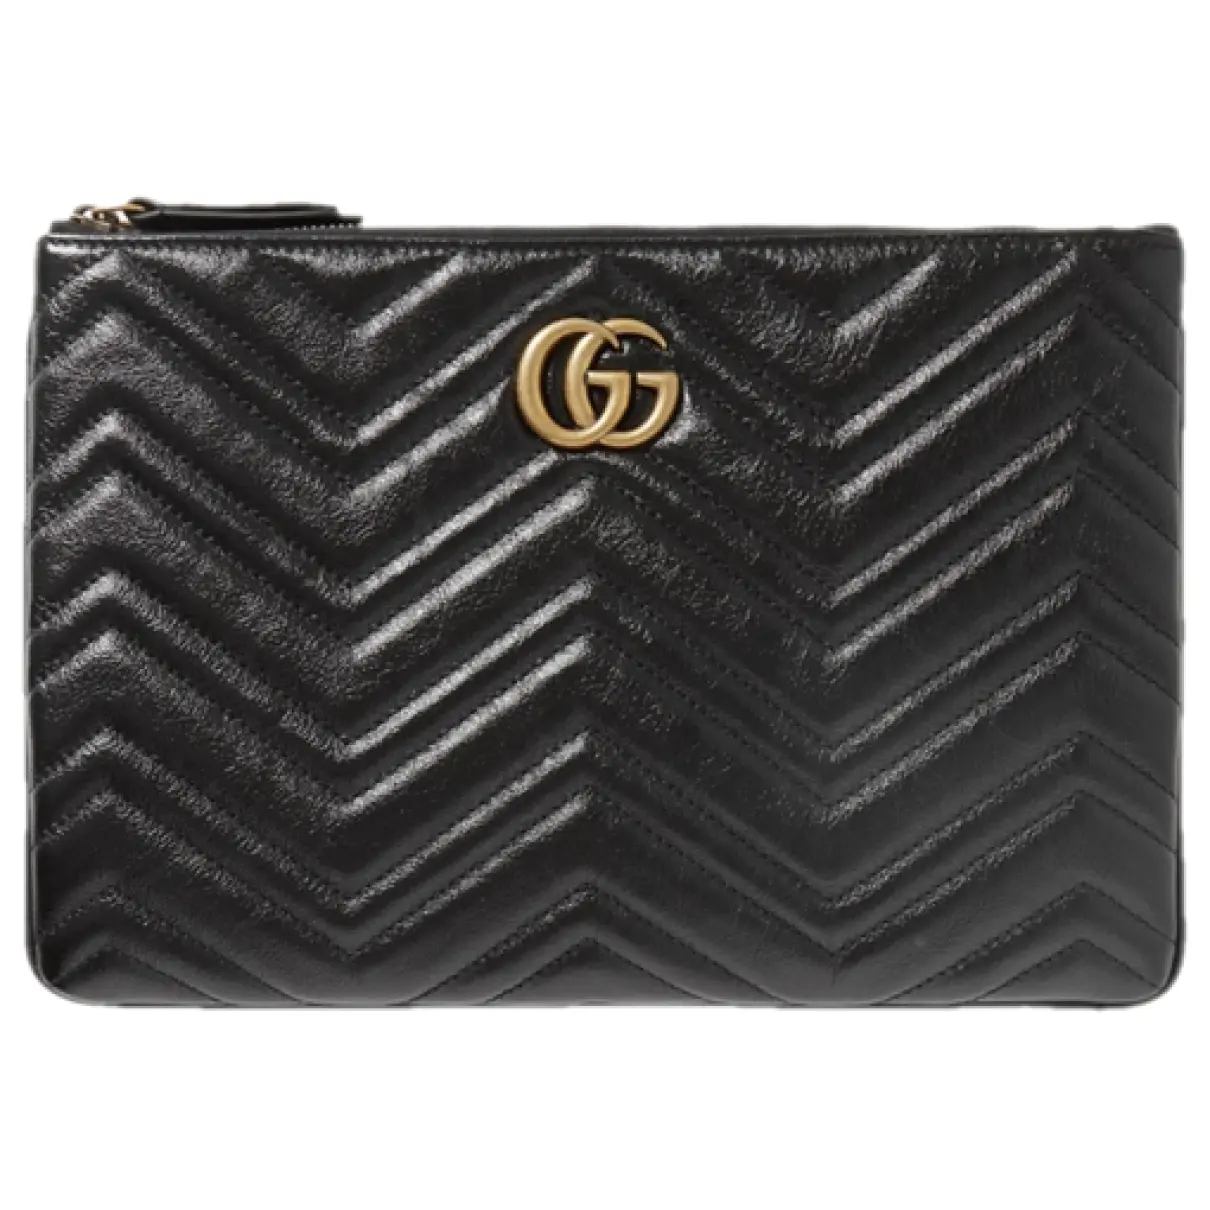 Marmont leather clutch bag